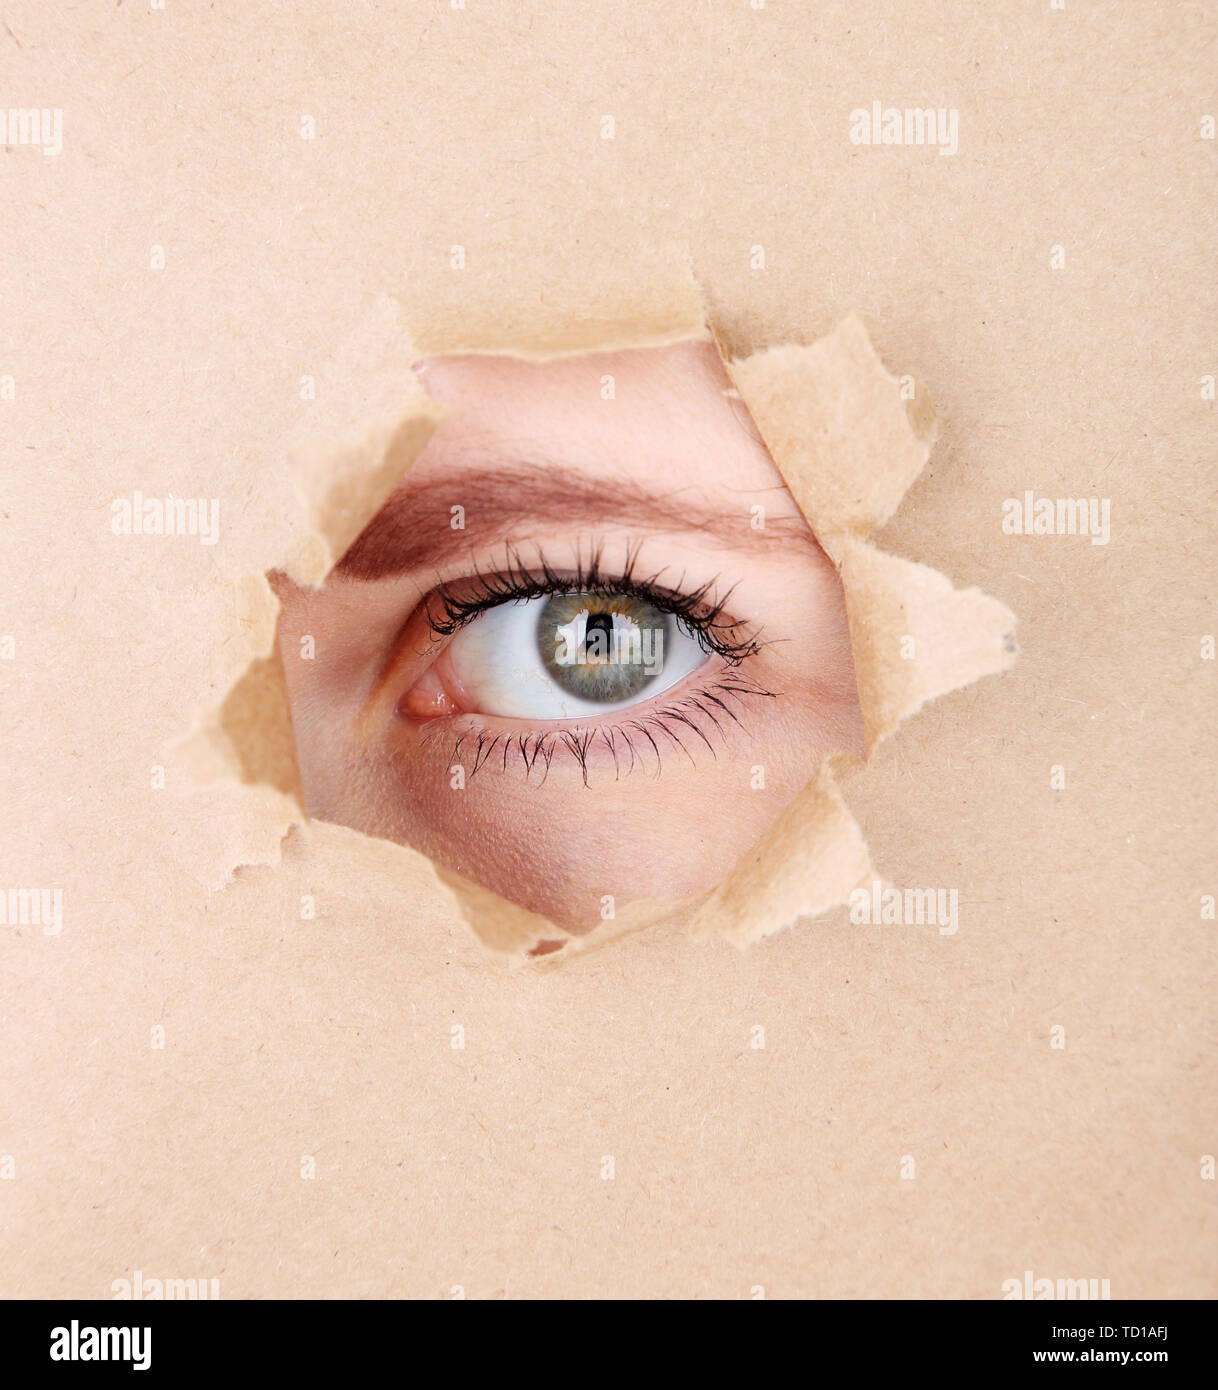 Female eye looking through hole in sheet of paper Stock Photo